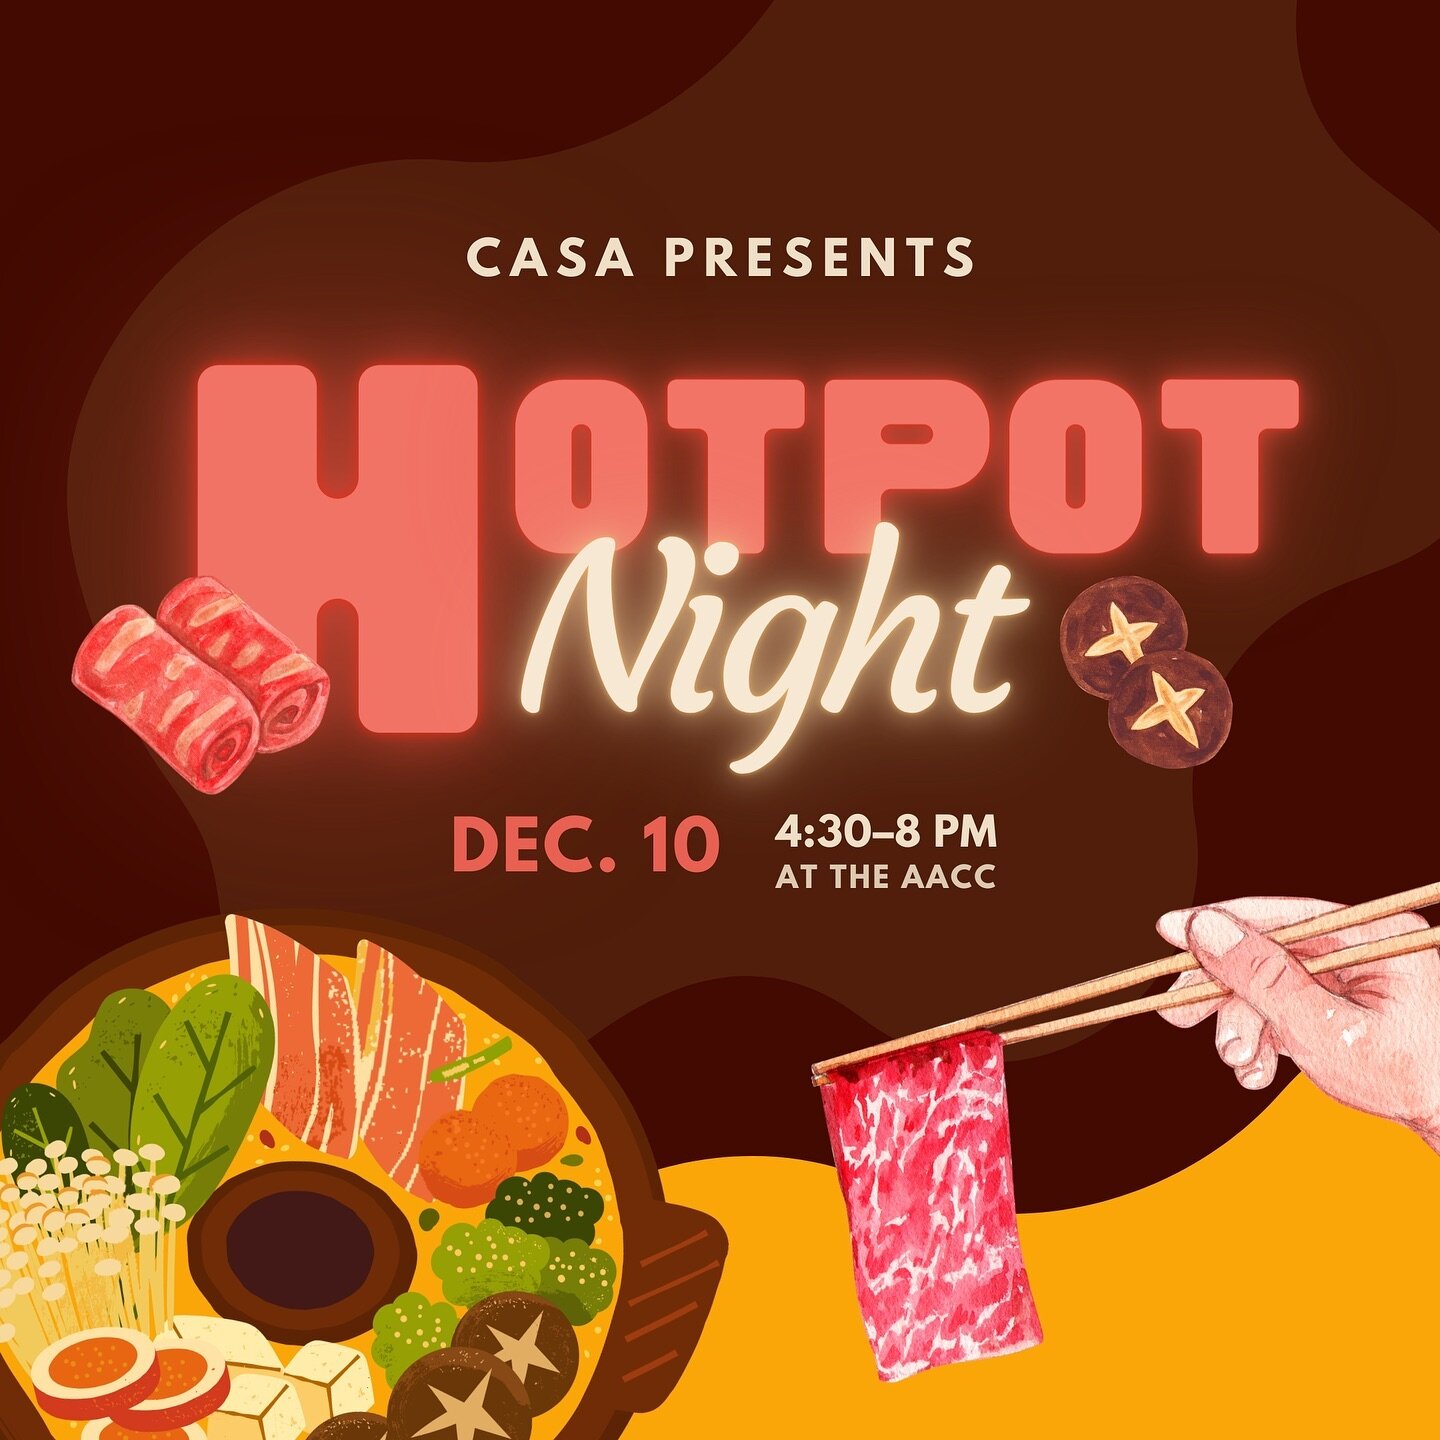 On a chilly winter day ❄️, there's no better way to unwind, spend quality time with friends, and meet new people than indulging in heart (and belly) warming FREE Hot Pot 🥘✨! We look forward to seeing you on December 10th at the AACC from 4:30&ndash;